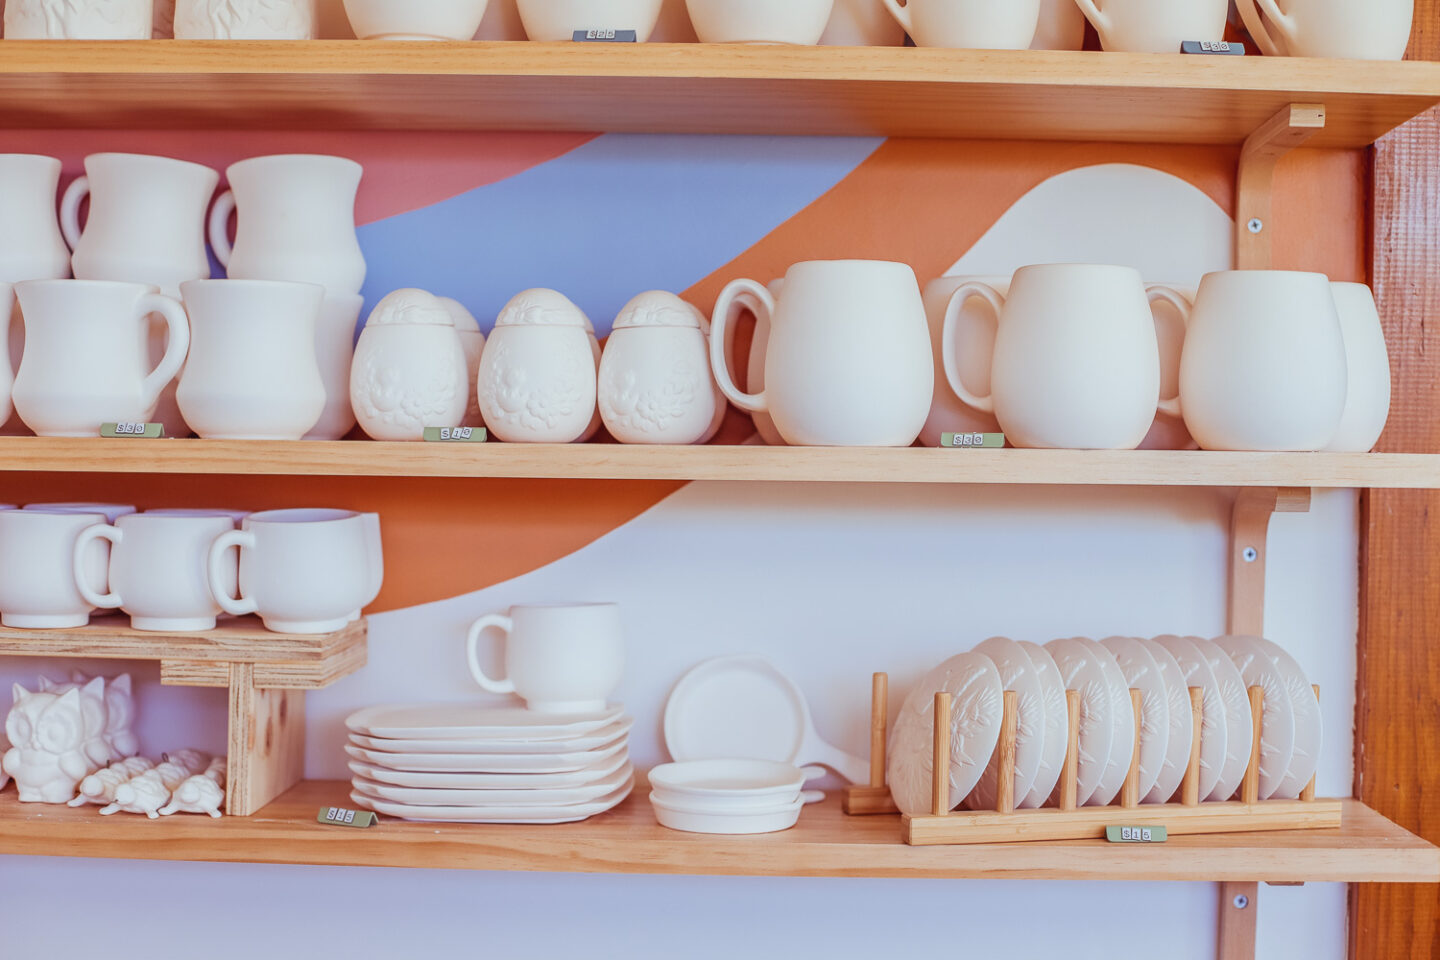 Ceramic pieces on their shelves ready to pick